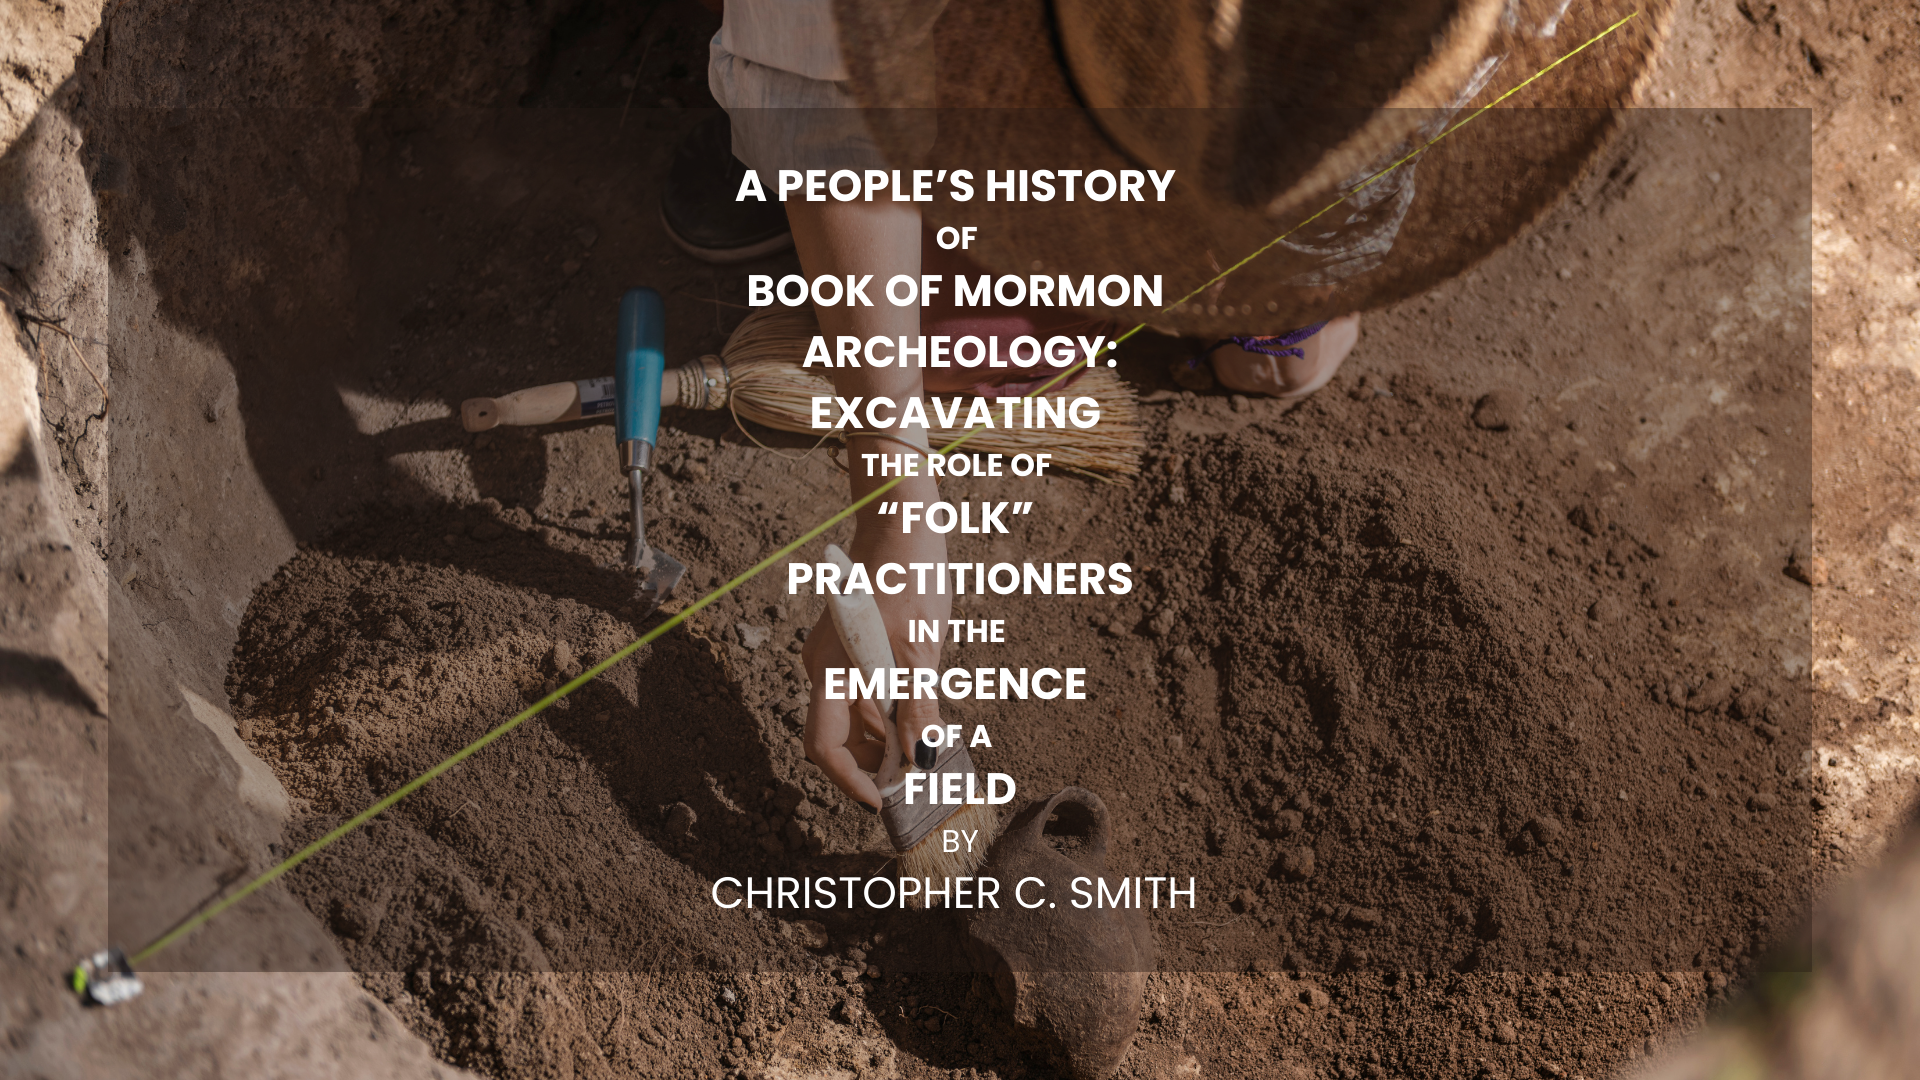 A People's History of Book of Mormon Archeology: Excavating the